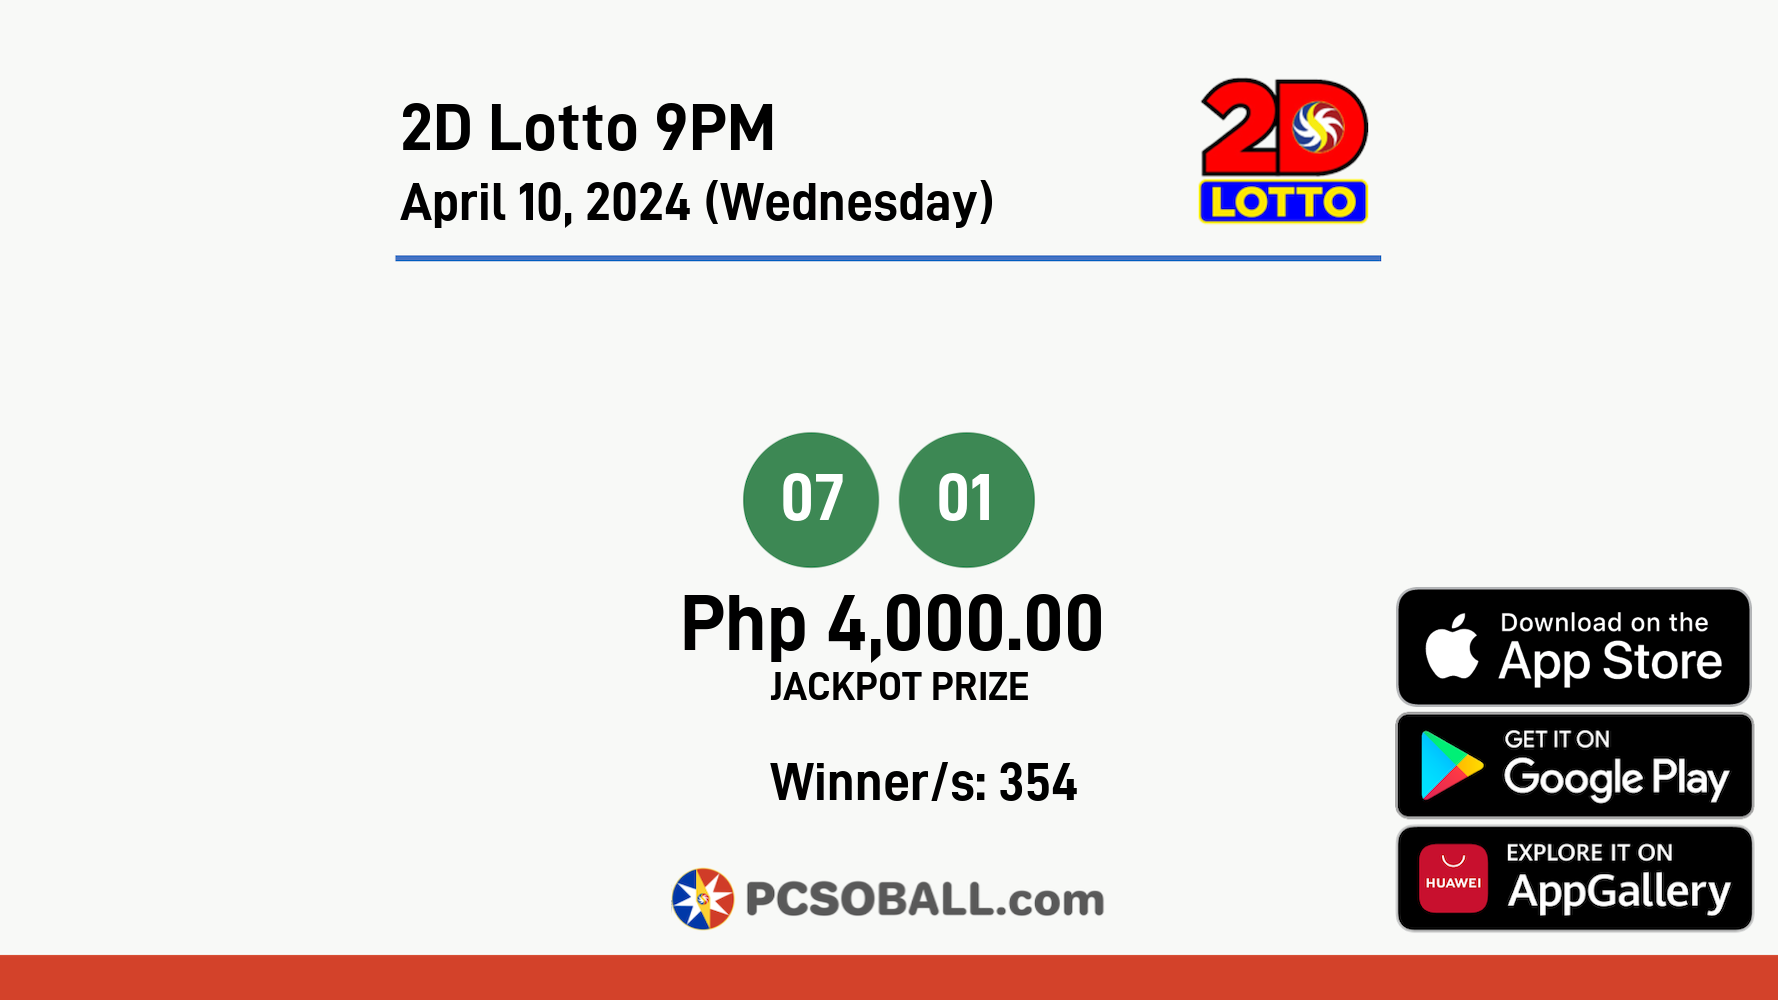 2D Lotto 9PM April 10, 2024 (Wednesday) Result